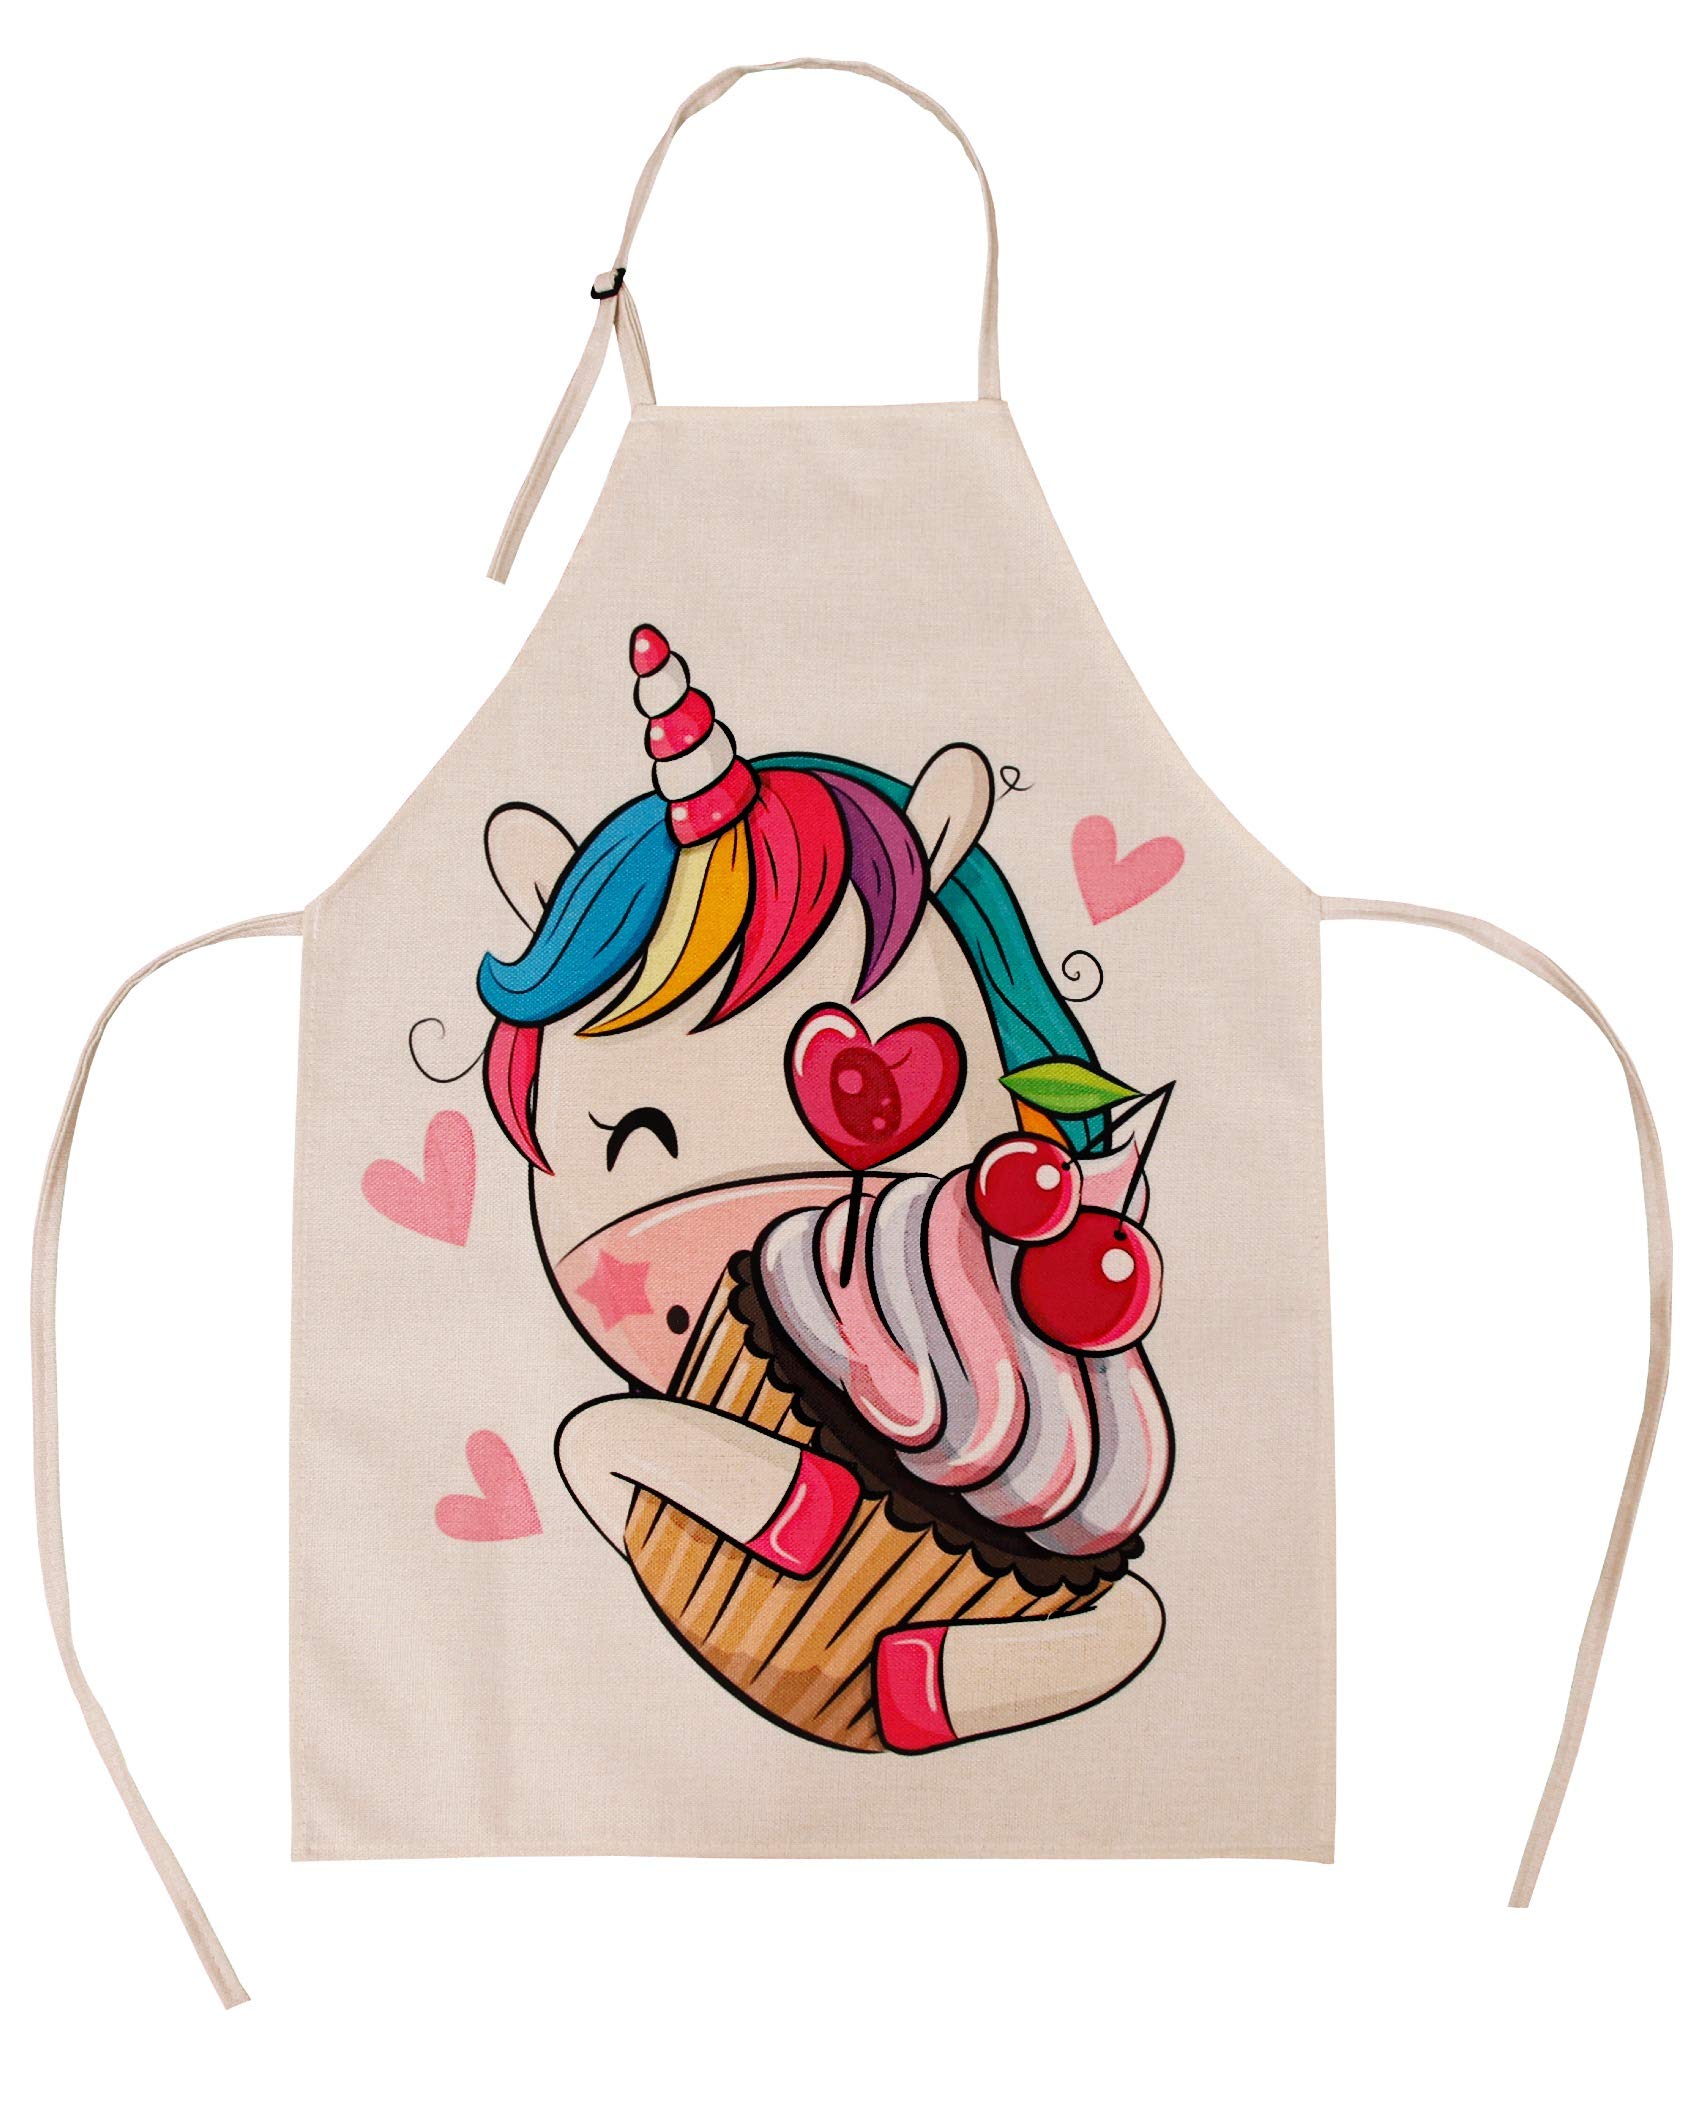 Unique Aprons - Unicorn Apron Cupcake Kids Apron for Birthday Party's, Gardening, Kitchen, Cooking, Baking Chef Activity Size Teen, Kids and Adults 8 Years Old and up Girl, Boy and Women, Mommy and Me